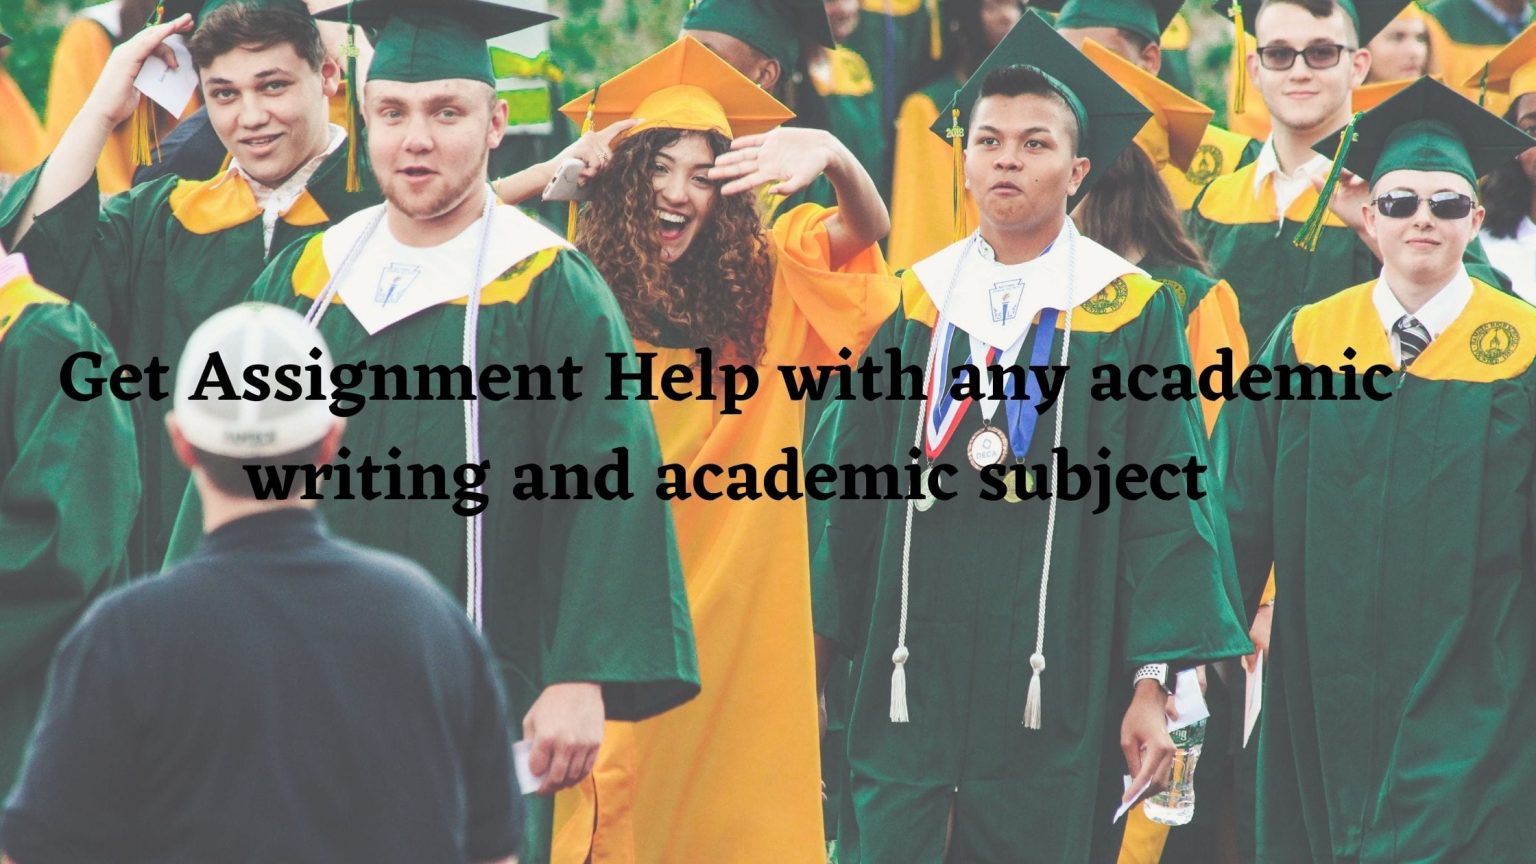 Get Assignment Help with any academic writing and academic subject